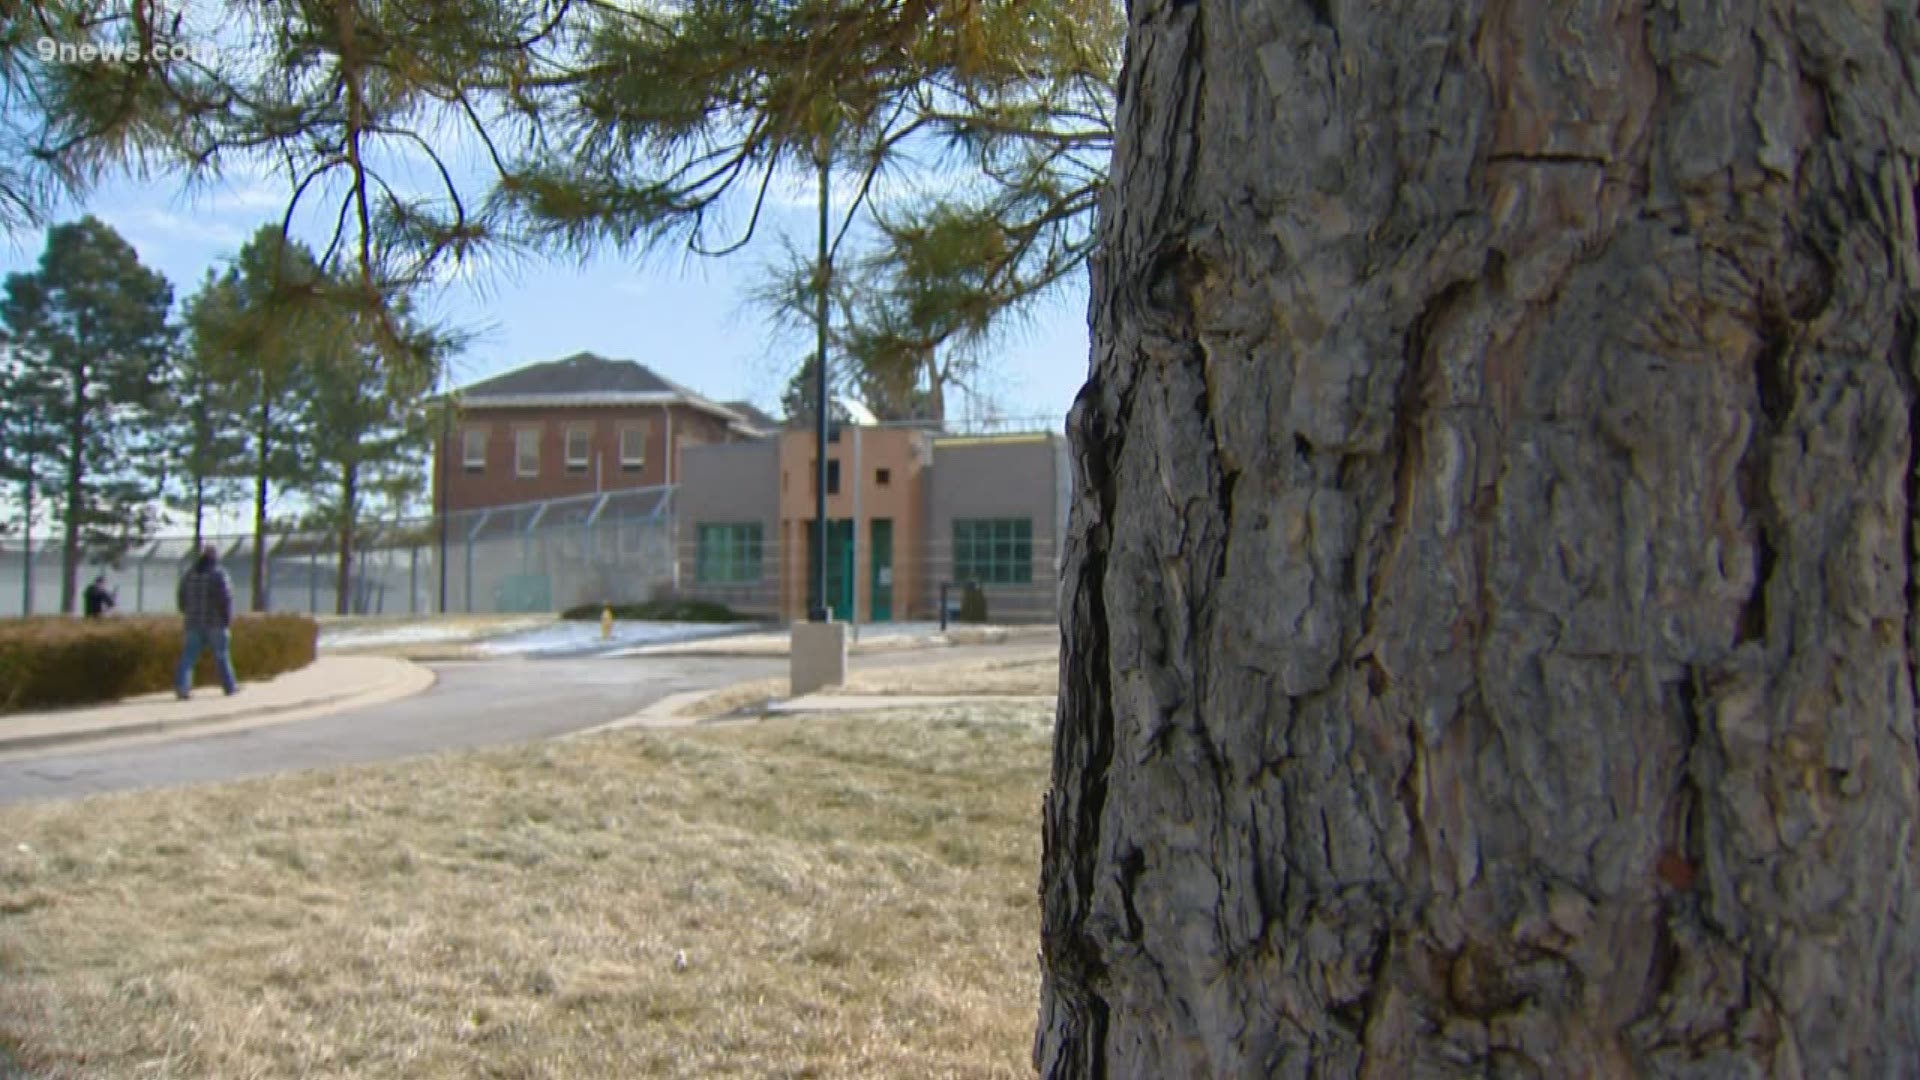 The state has been working to identify the root causes after numerous escapes last year at the Lookout Mountain Youth Services Center.